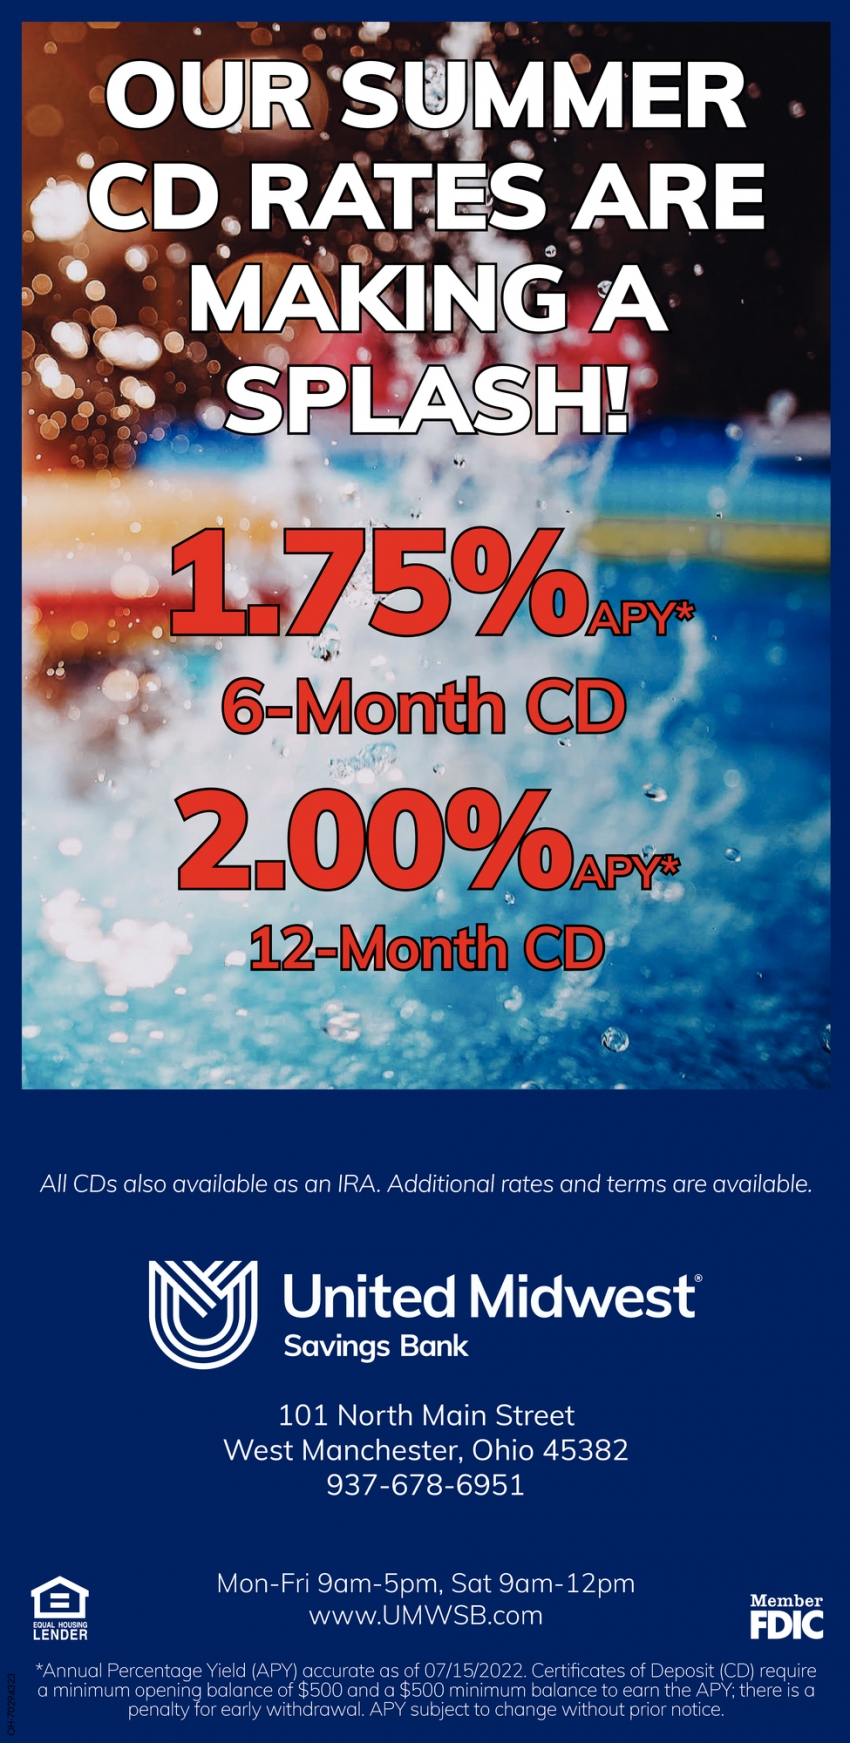 Our Summer CD Rates Are Making A Splash